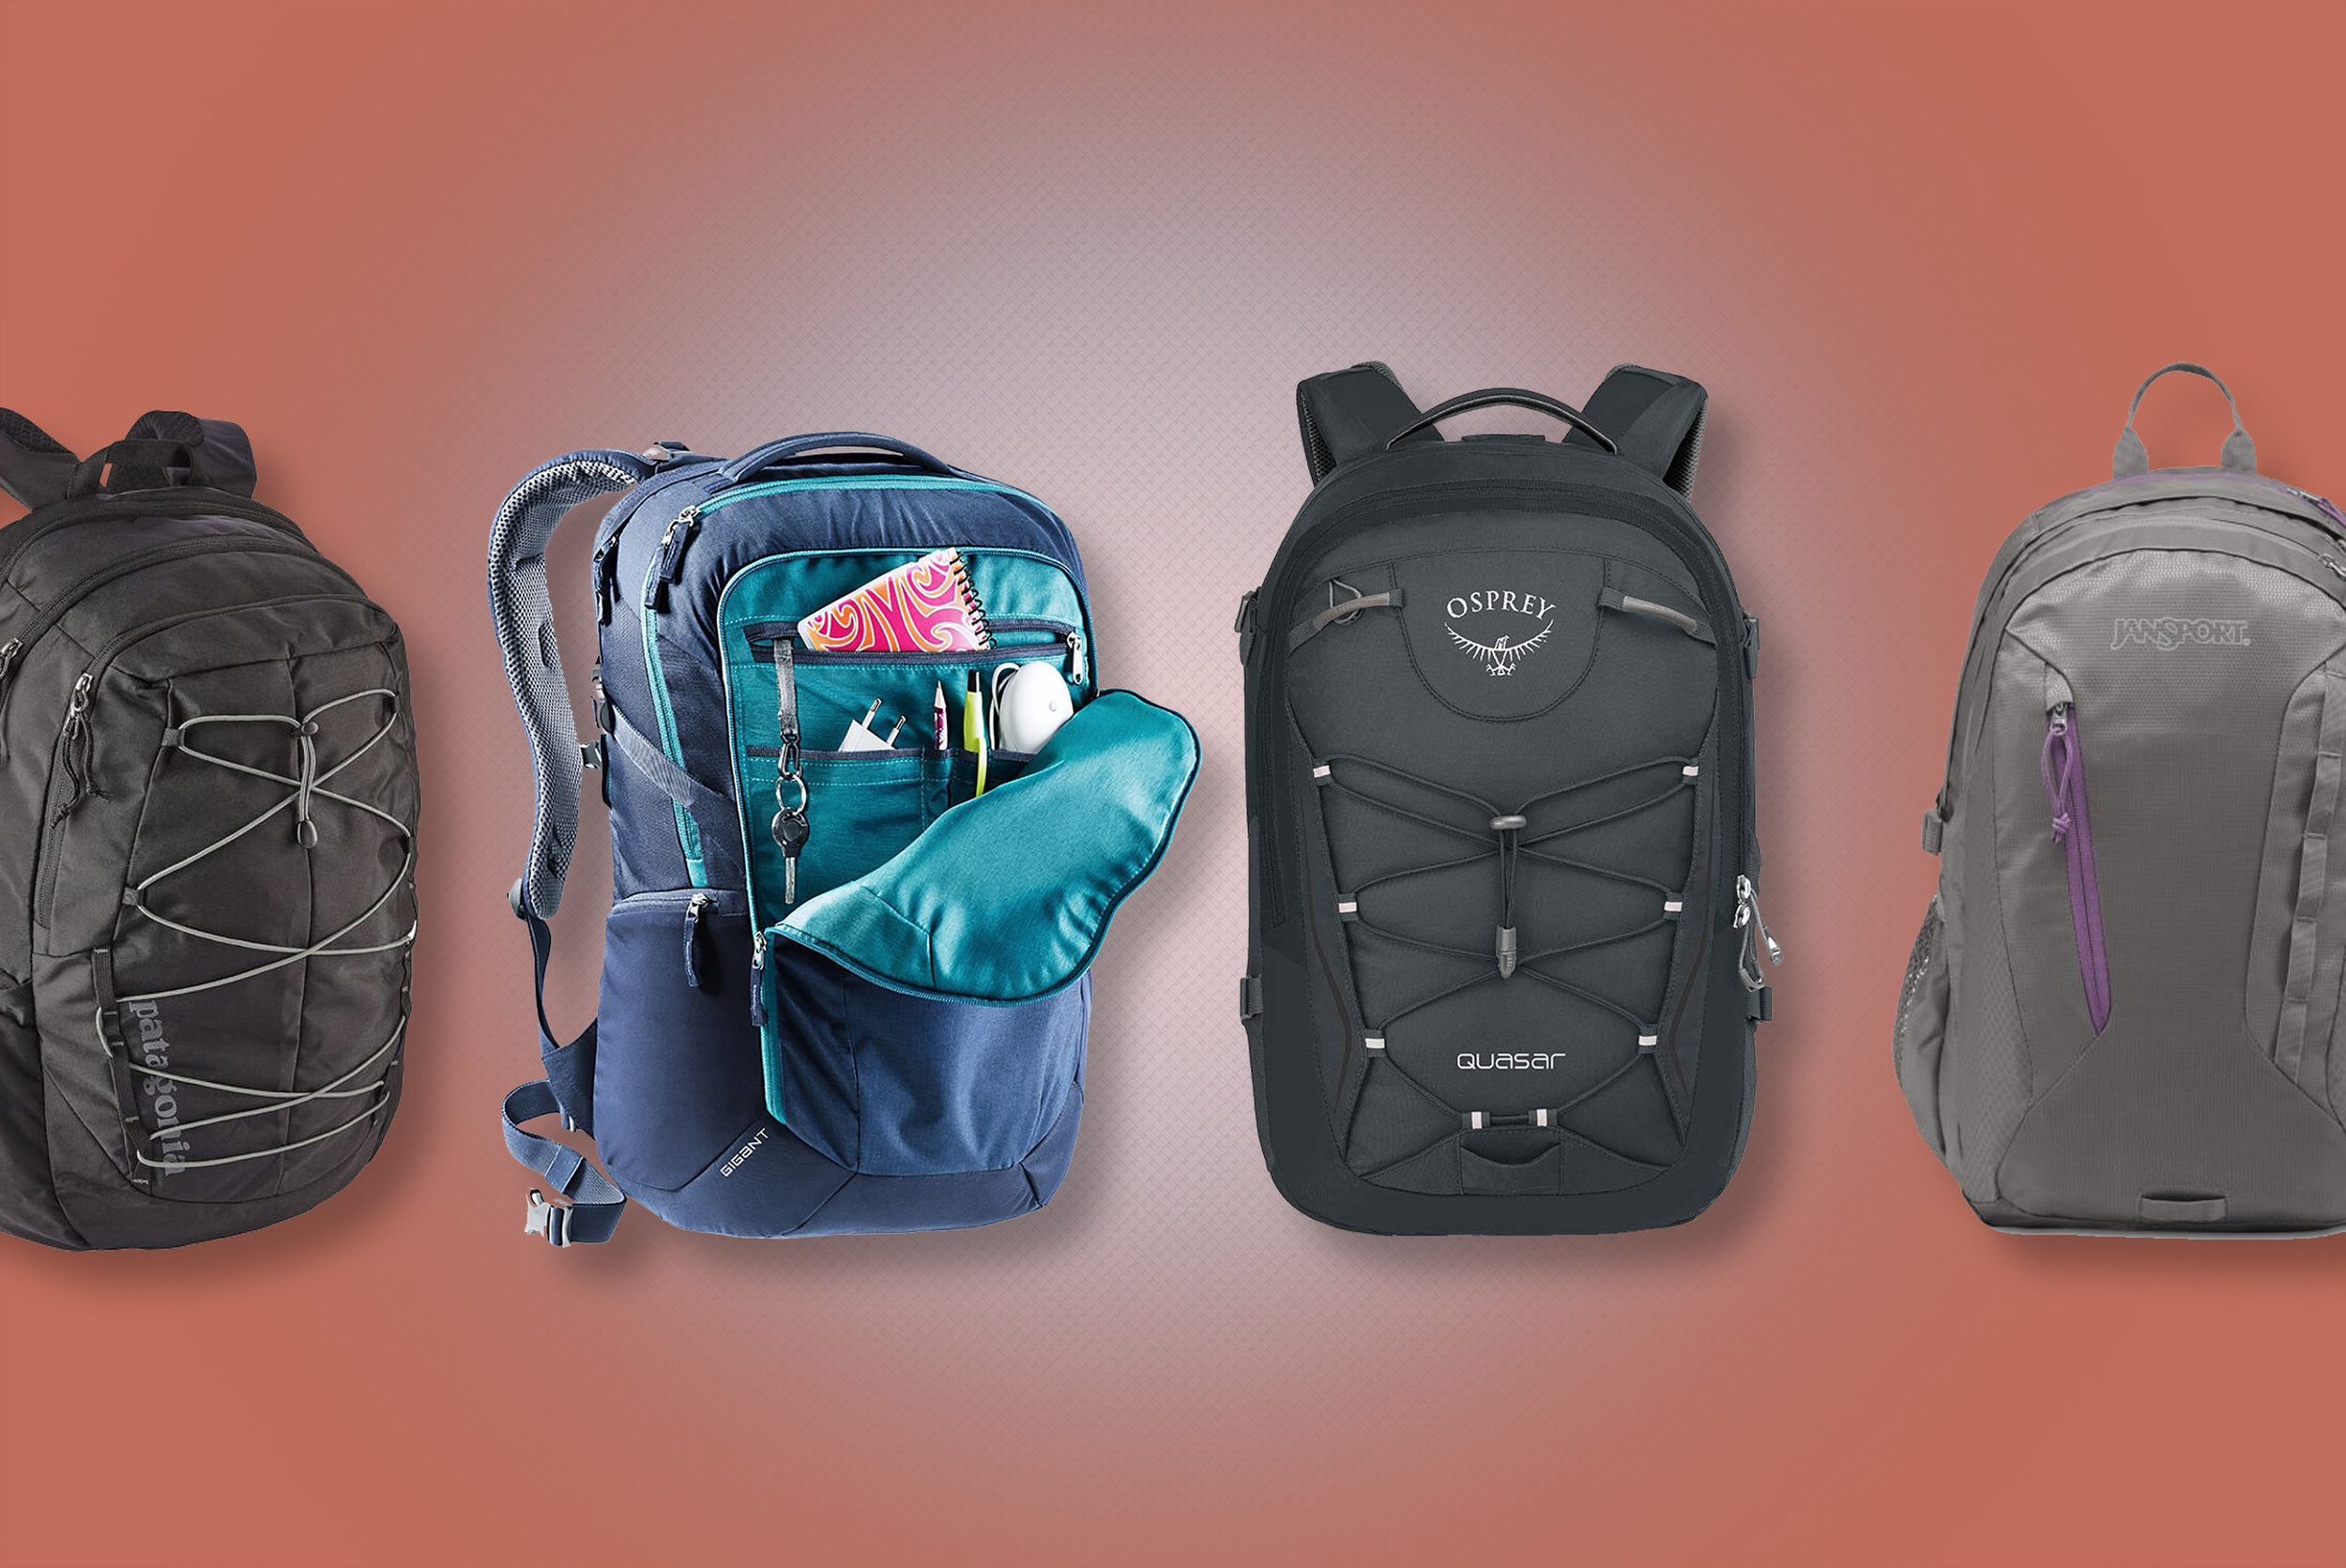 north face backpack styles